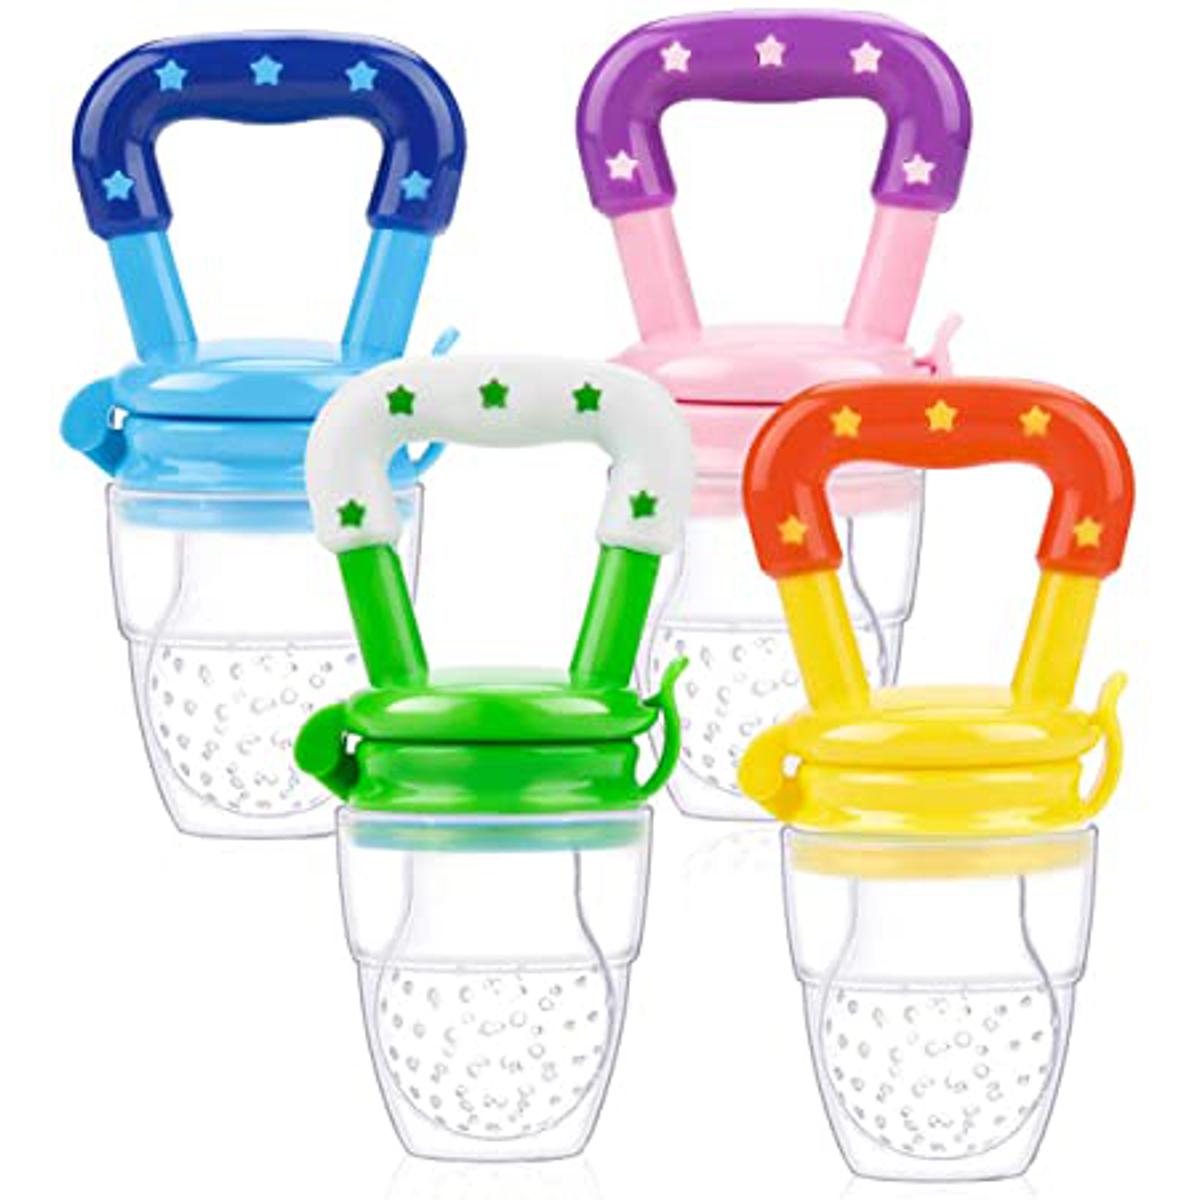 BabyGo Organic Baby's BPA-Free Silicone Nipple Food Nibbler for Fruits with Rattle Handle and Storage Box (Multicolour, 6-12 Months)